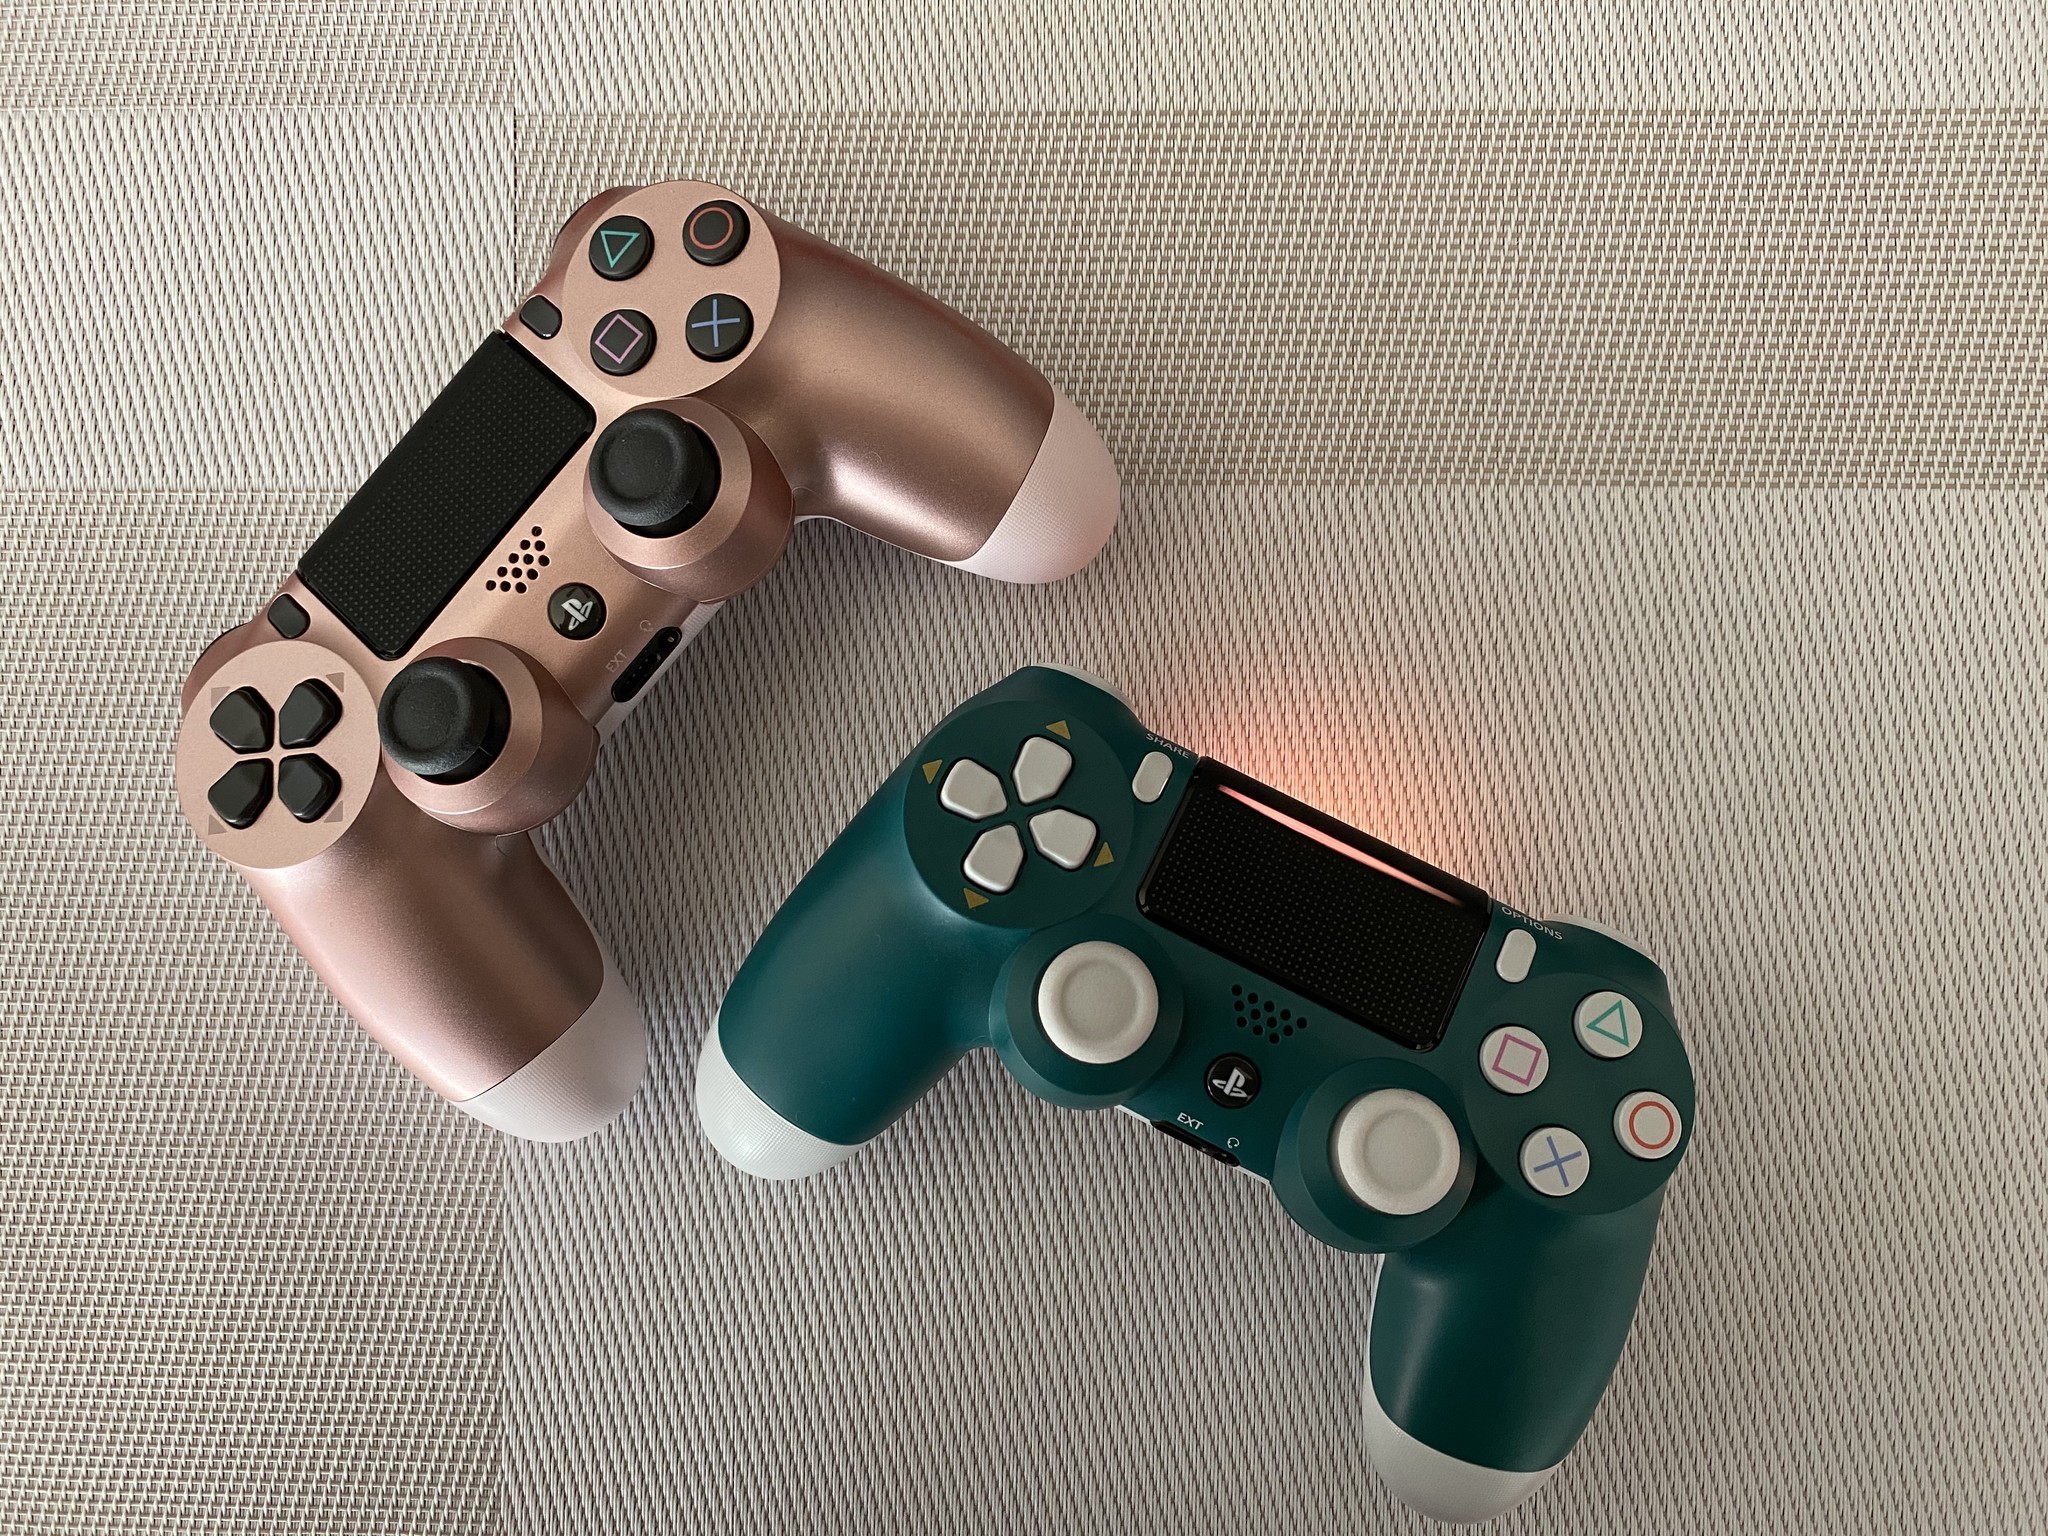 Get a DualShock 4 controller to use with Apple Arcade for super cheap!